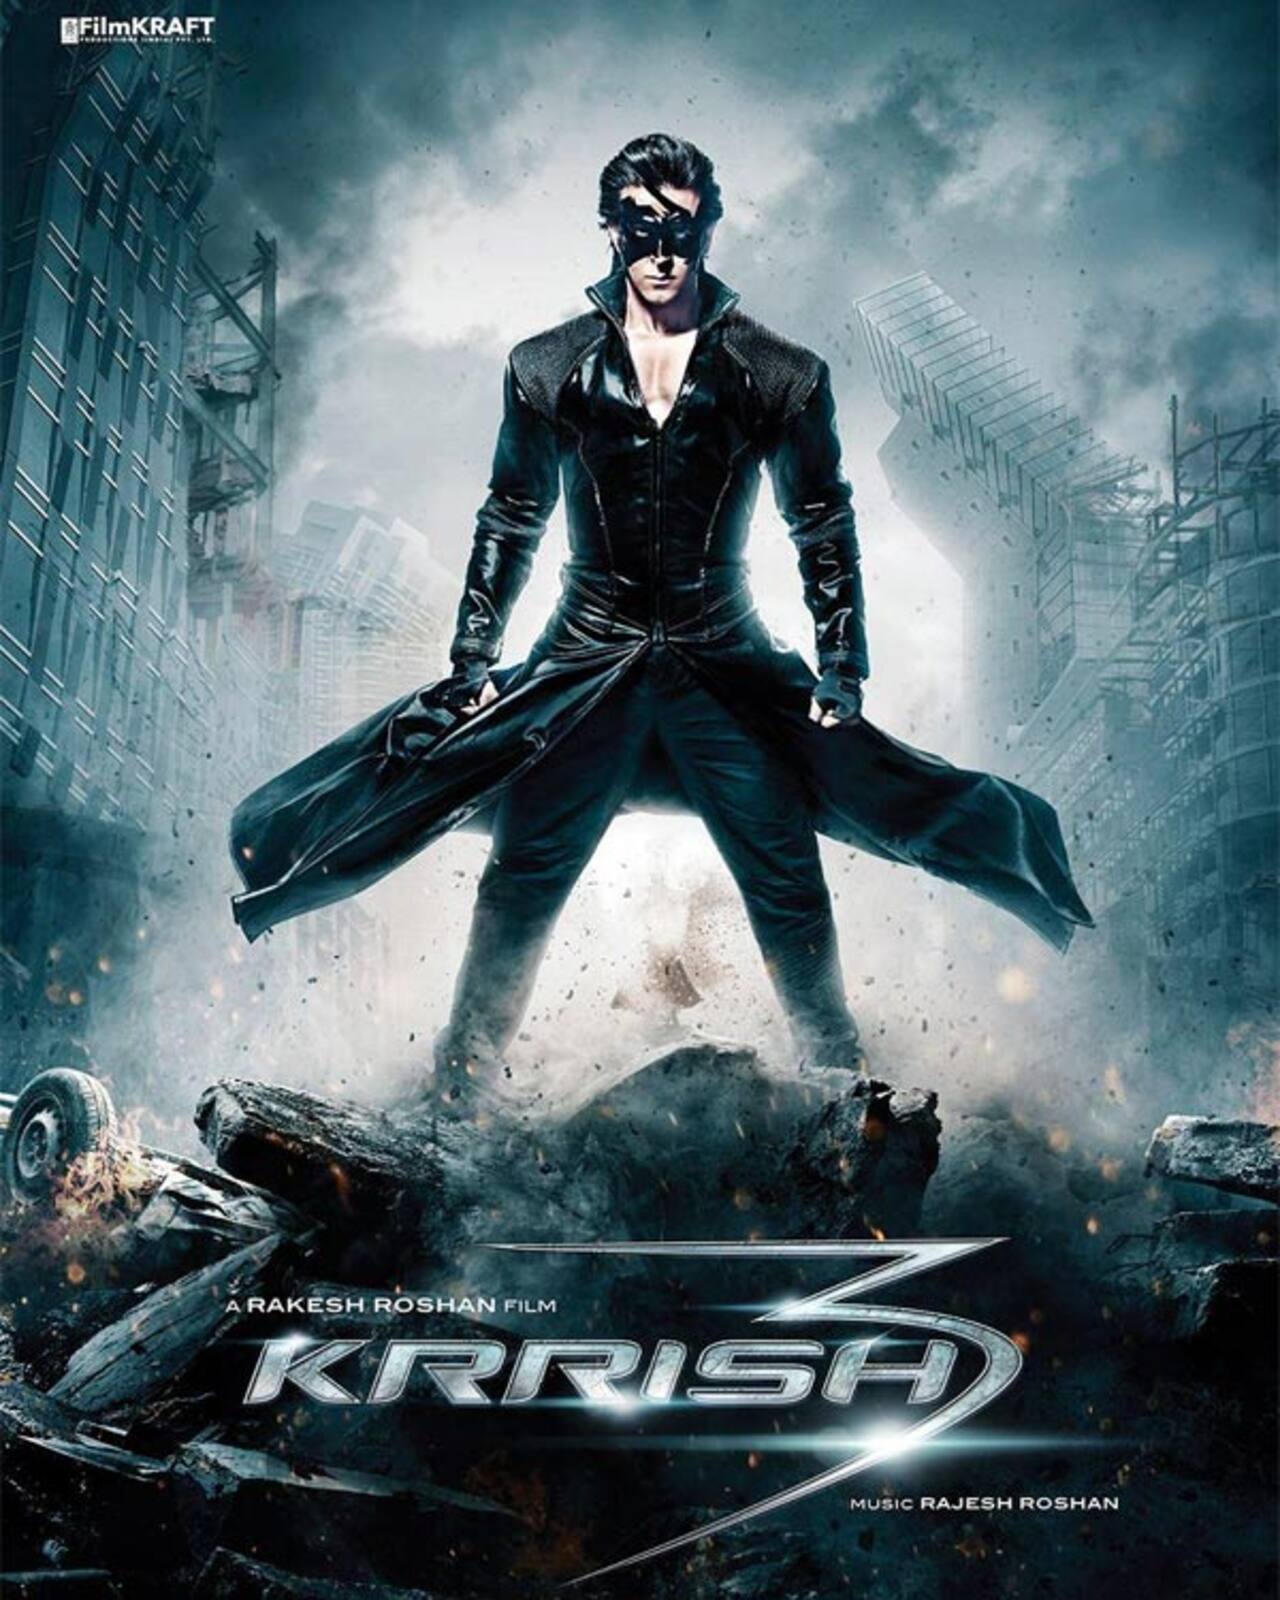 Why will Krrish 3 be a blockbuster?